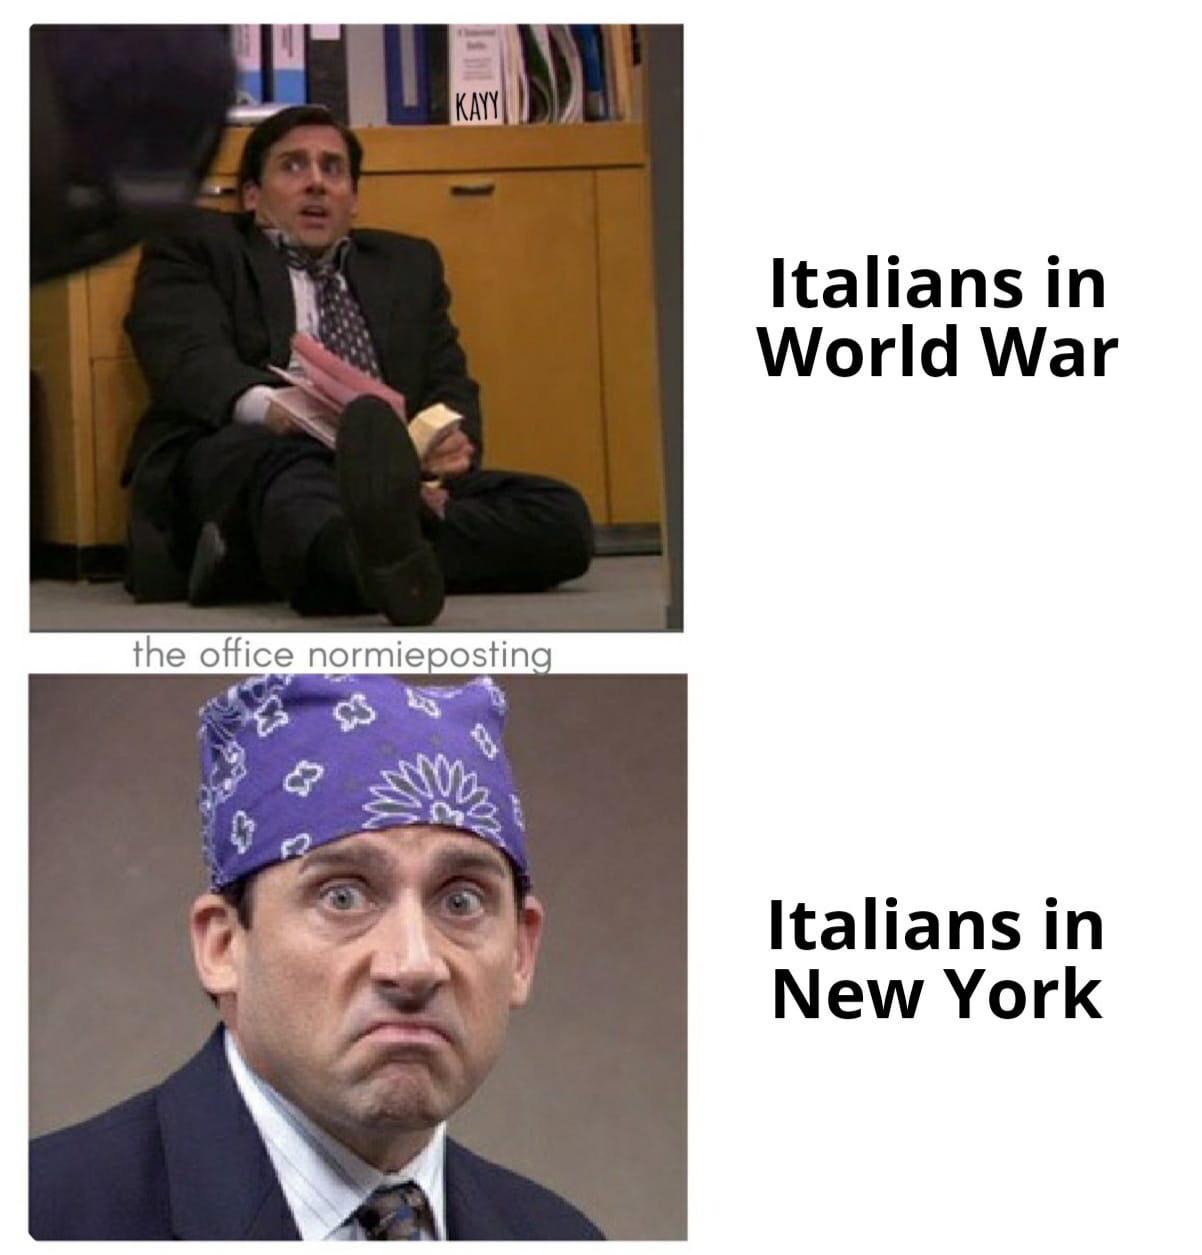 the office - prison mike and the dementors - Italians in World War the office normieposting Italians in New York